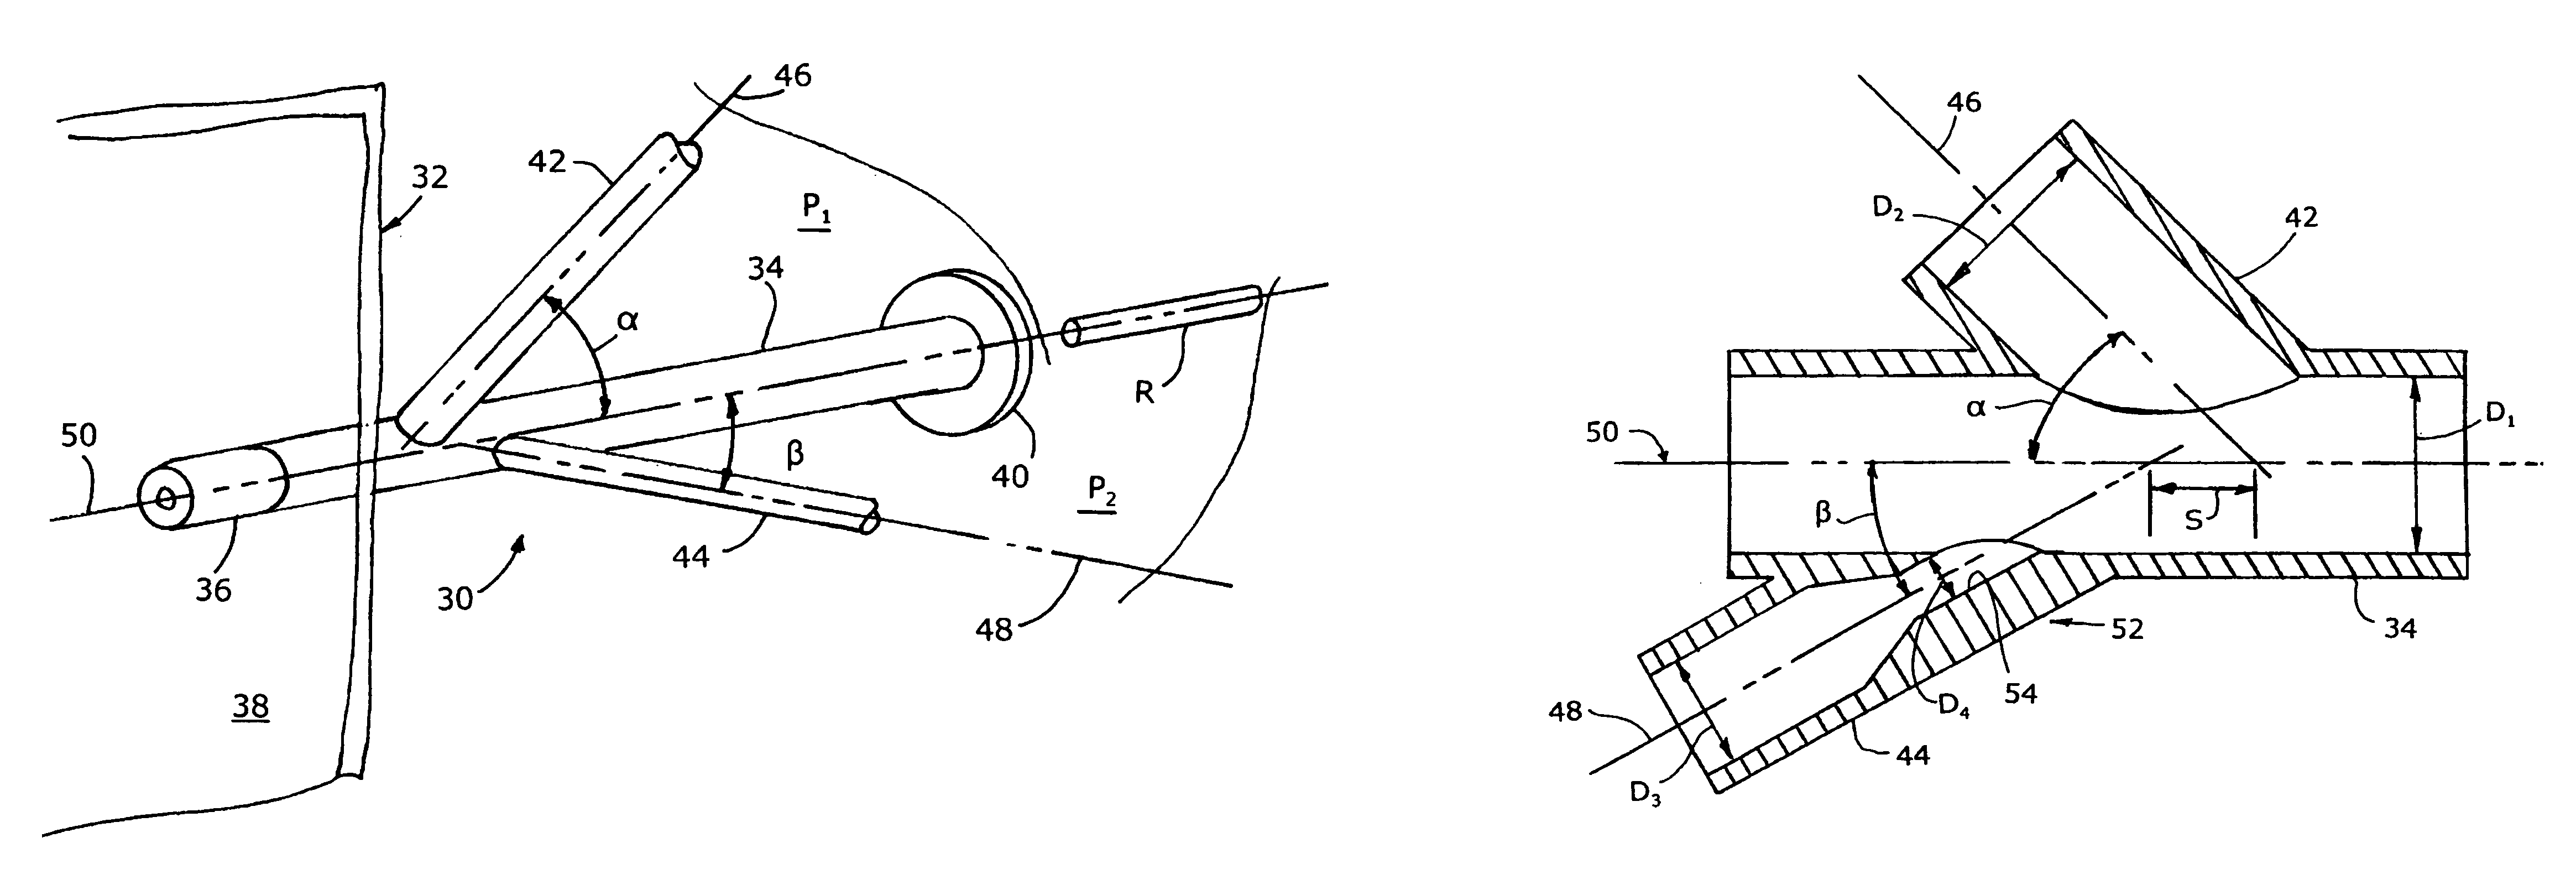 Mixing arrangement for atomizing nozzle in multi-phase flow